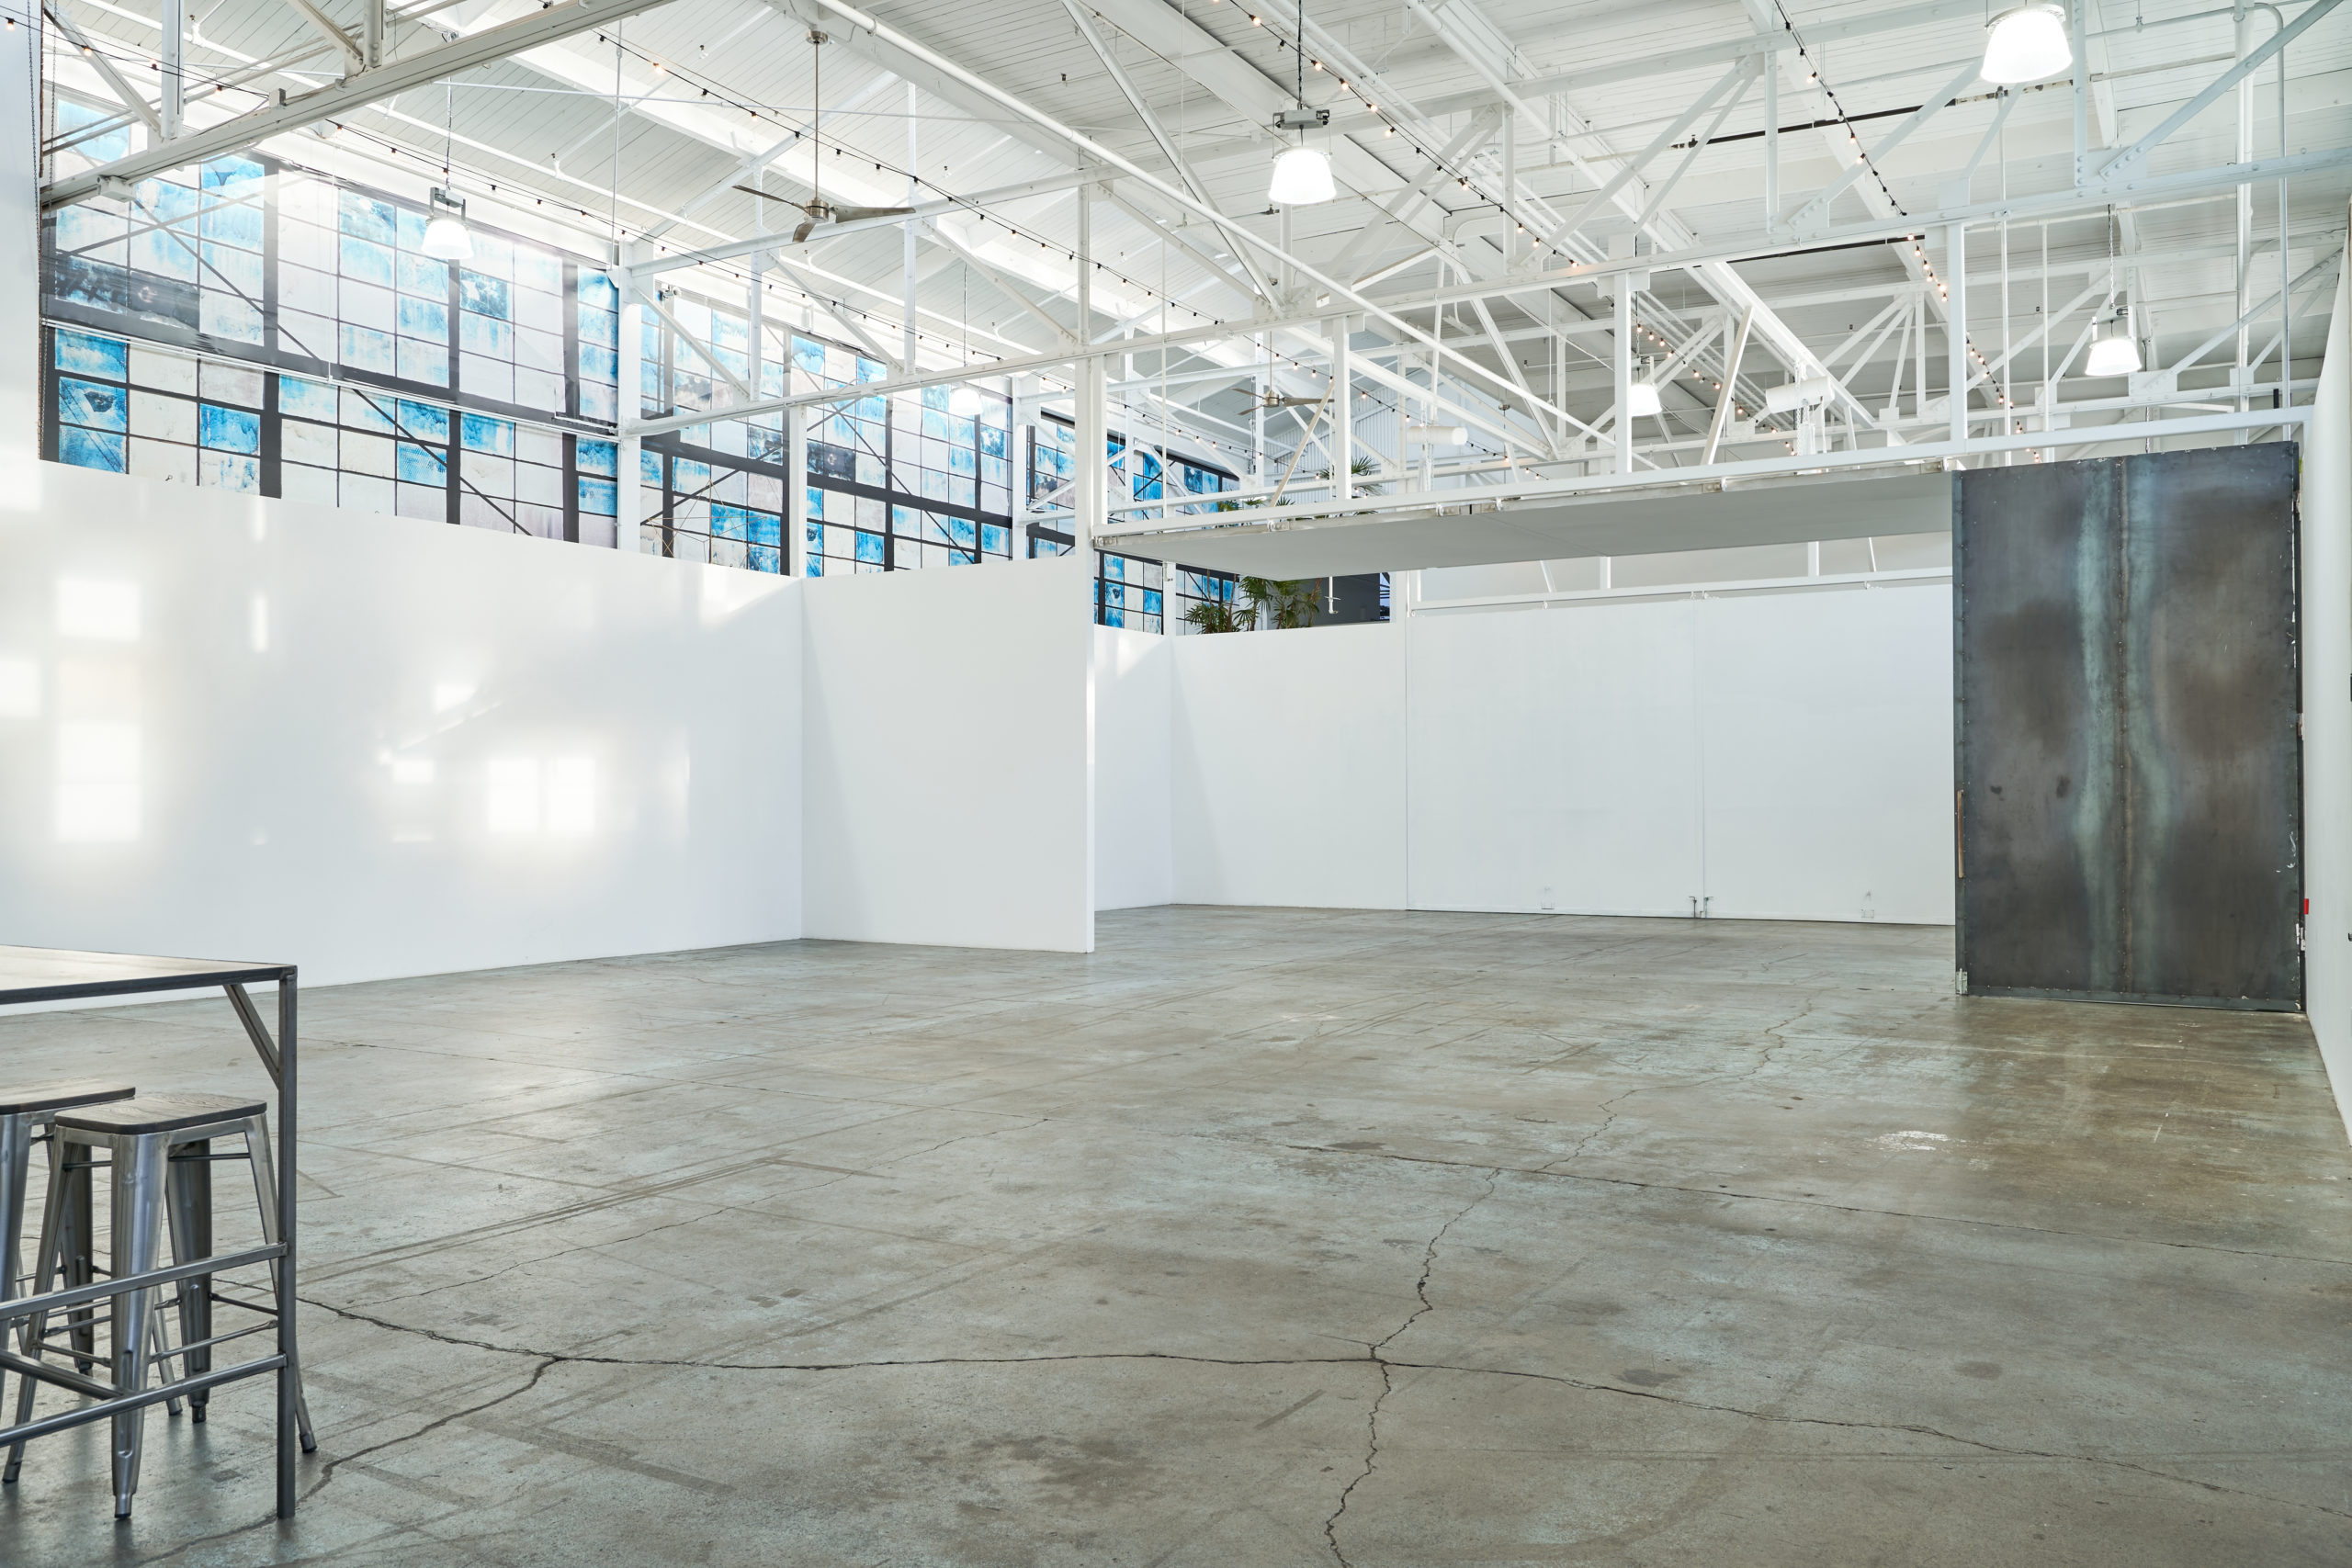 View of the wide open space of Studio 4 with white walls, white industrial beams on the ceiling, and large windows on the top left with blue panes in this multimedia studio space. You can also see a table with chairs in the foreground on the left.